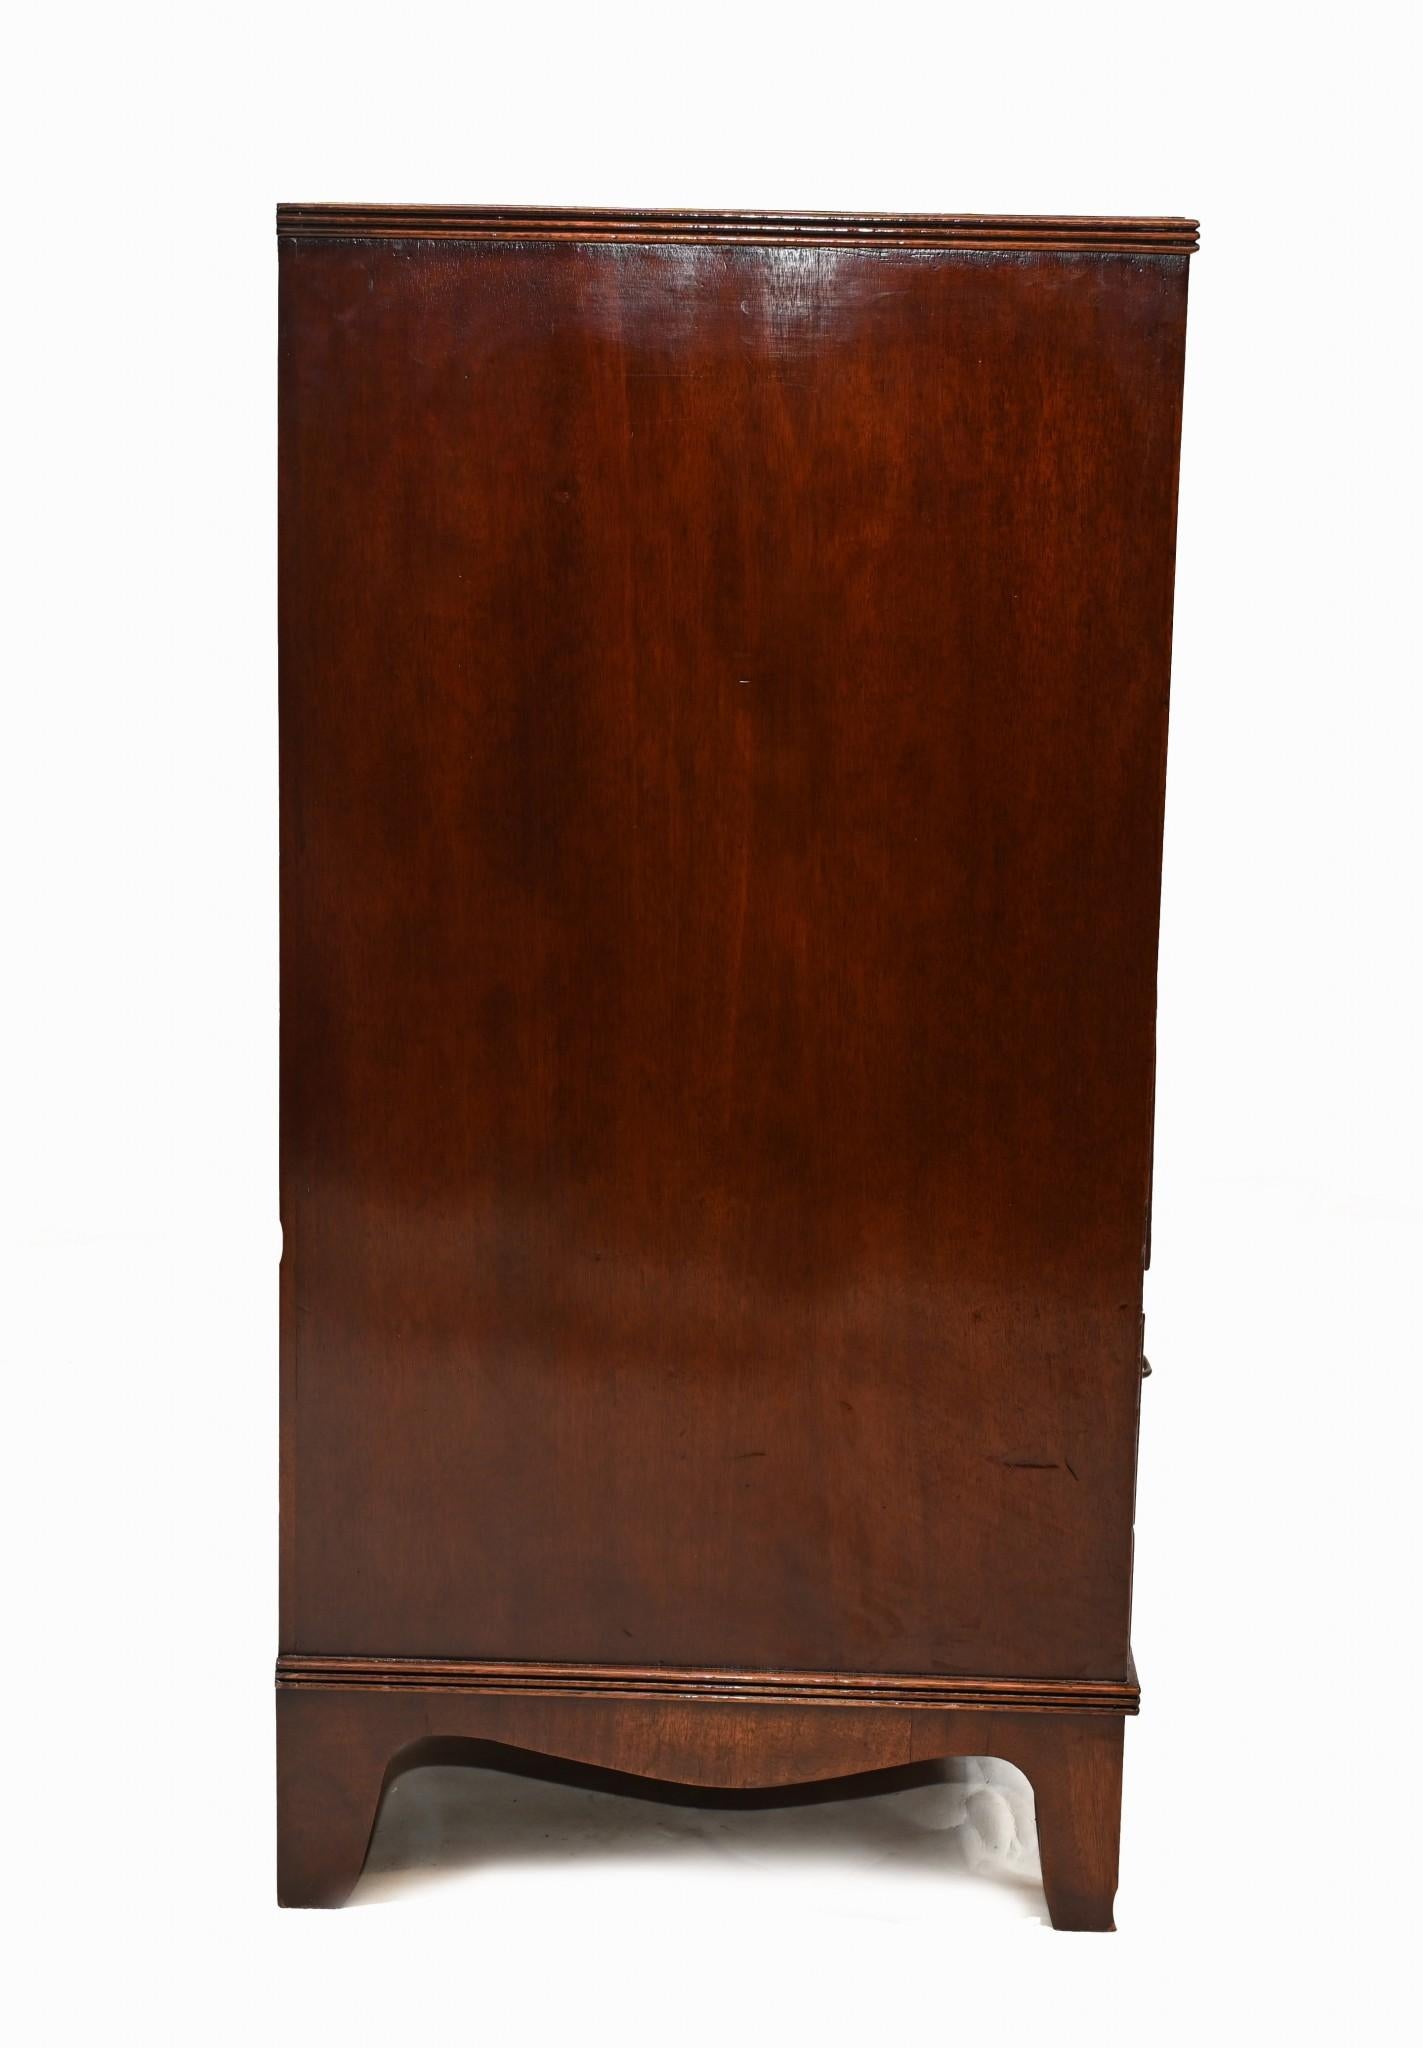 Charming Georgian chest of drawers in mahogany
Clean and simple design in the Hepplewhite manner
Circa 1810 on this fine piece of elegant English furniture
Great patina to the wood, I bet this piece could tell some stories
Some of our items are